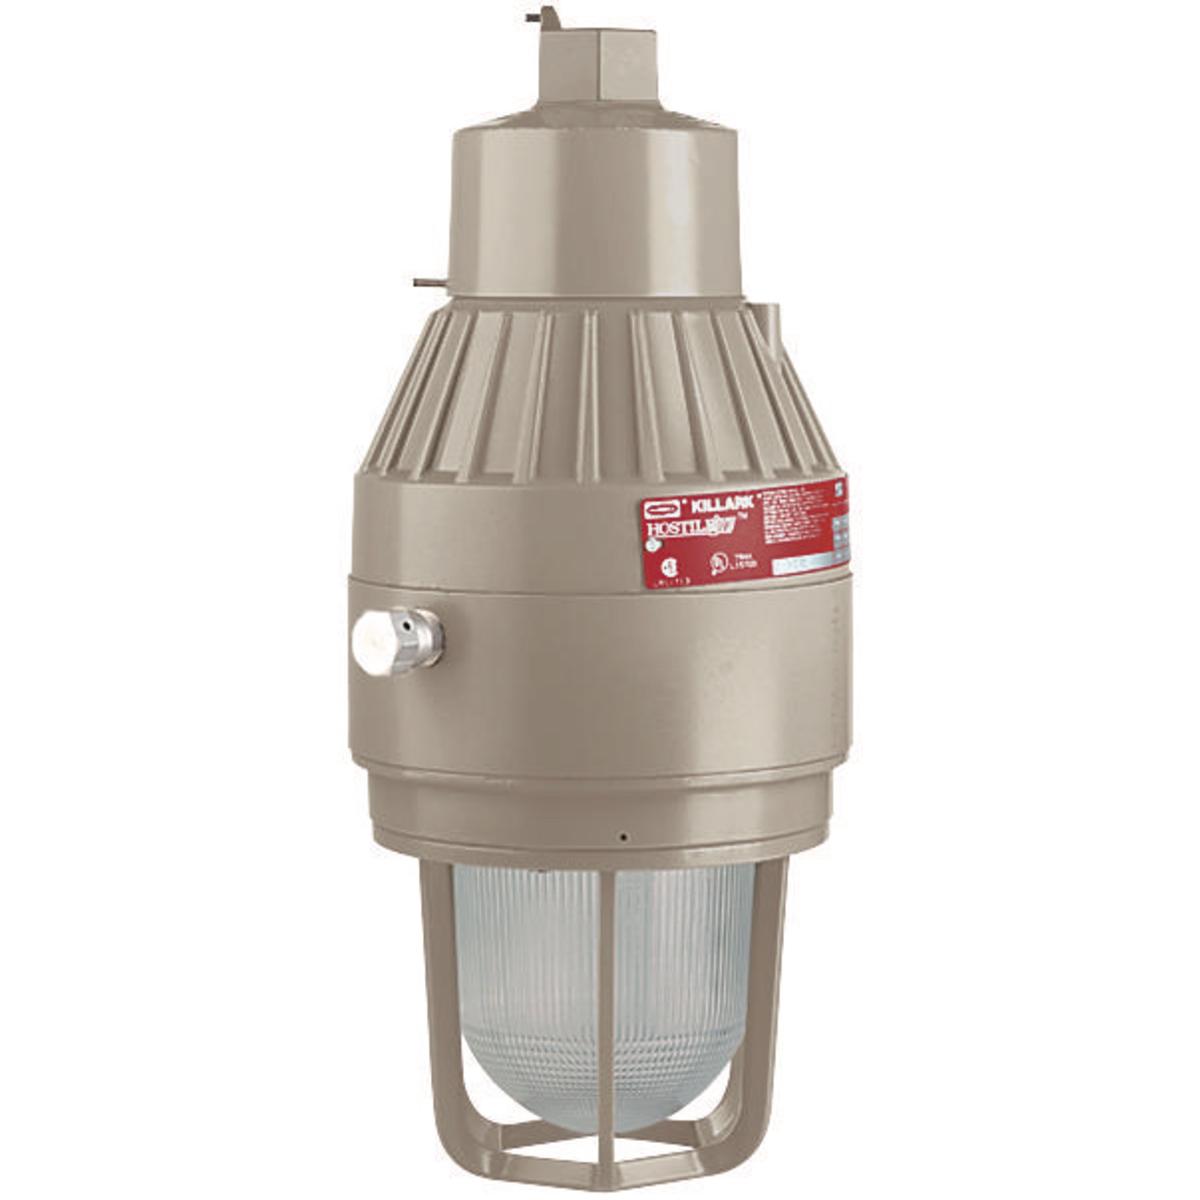 Hubbell EEQ2626E30A2 EEQ Emergency CFL 26N26E 120/277V Pendant  ; Quad-Pin long-life triple-tube compact ; Fluorescent lamps included ; Choice of Pendant, Ceiling, Wall or Stanchion mount ; Factory Sealed - No external seal required ; Corrosion resistant-Copper-free aluminum 